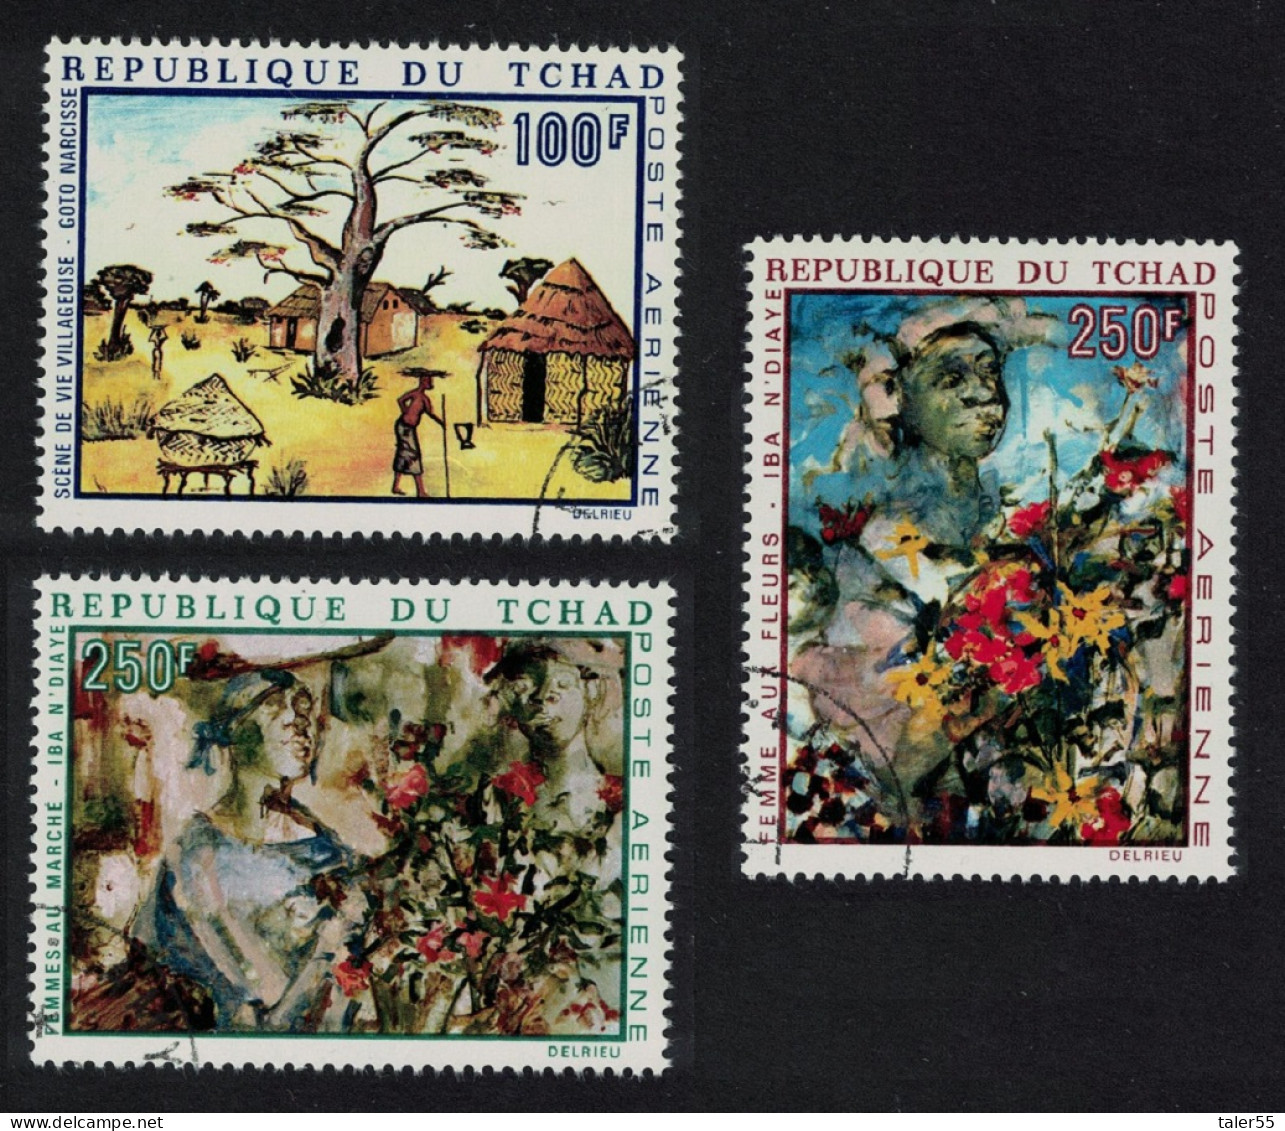 Chad African Paintings 3v 1970 CTO SG#296-298 - Ciad (1960-...)